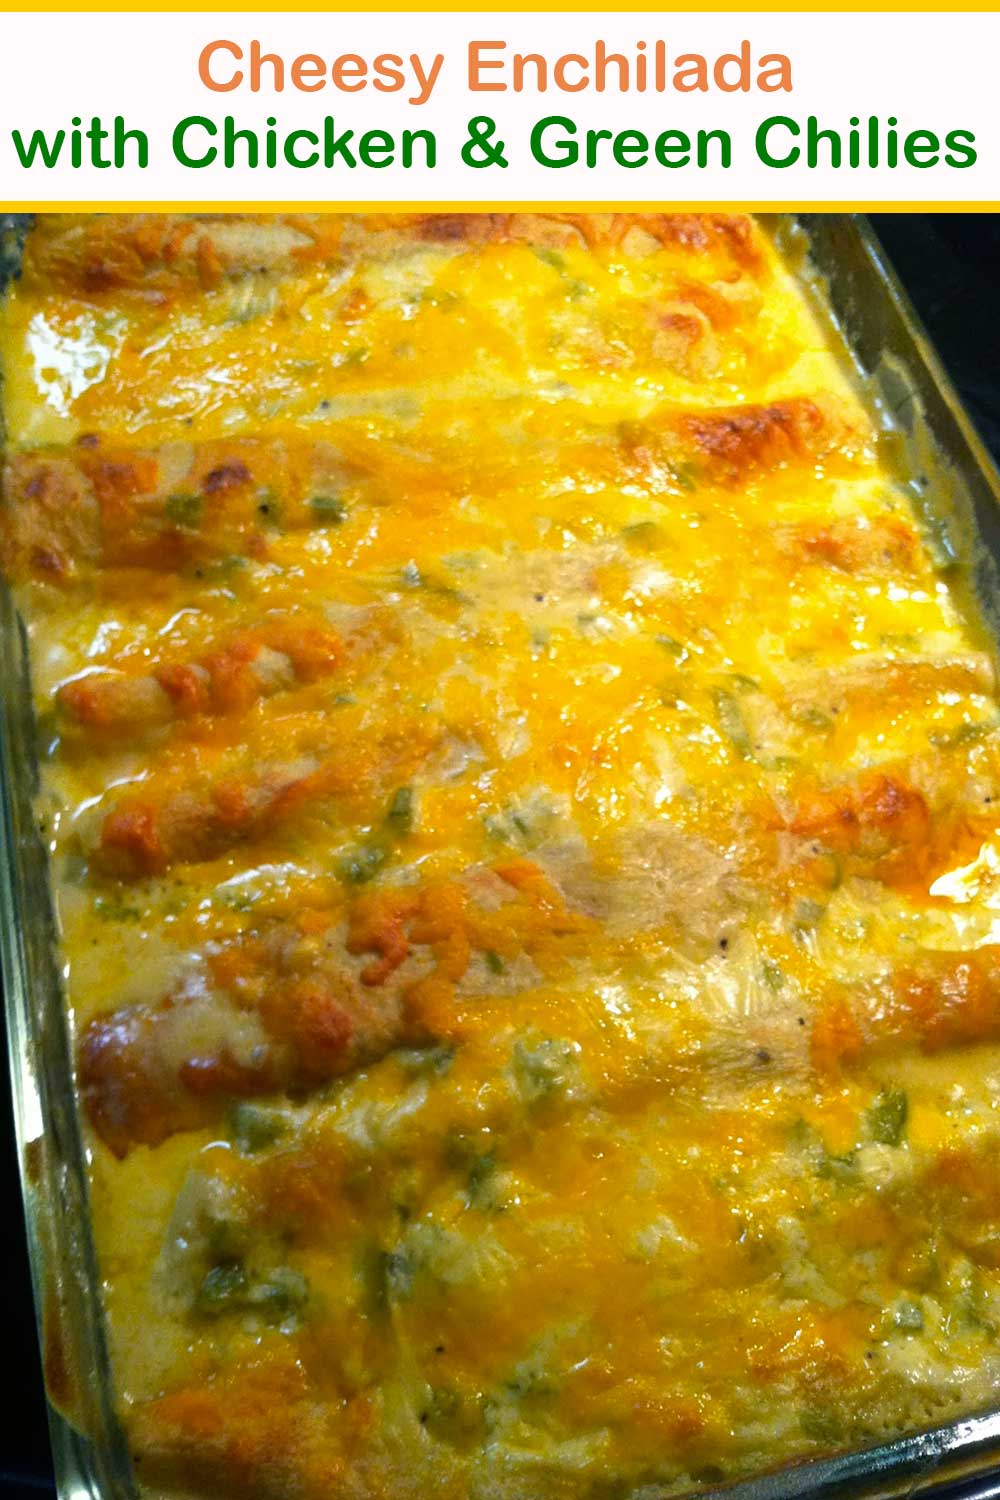 Cheesy Enchilada with Chicken & Green Chilies